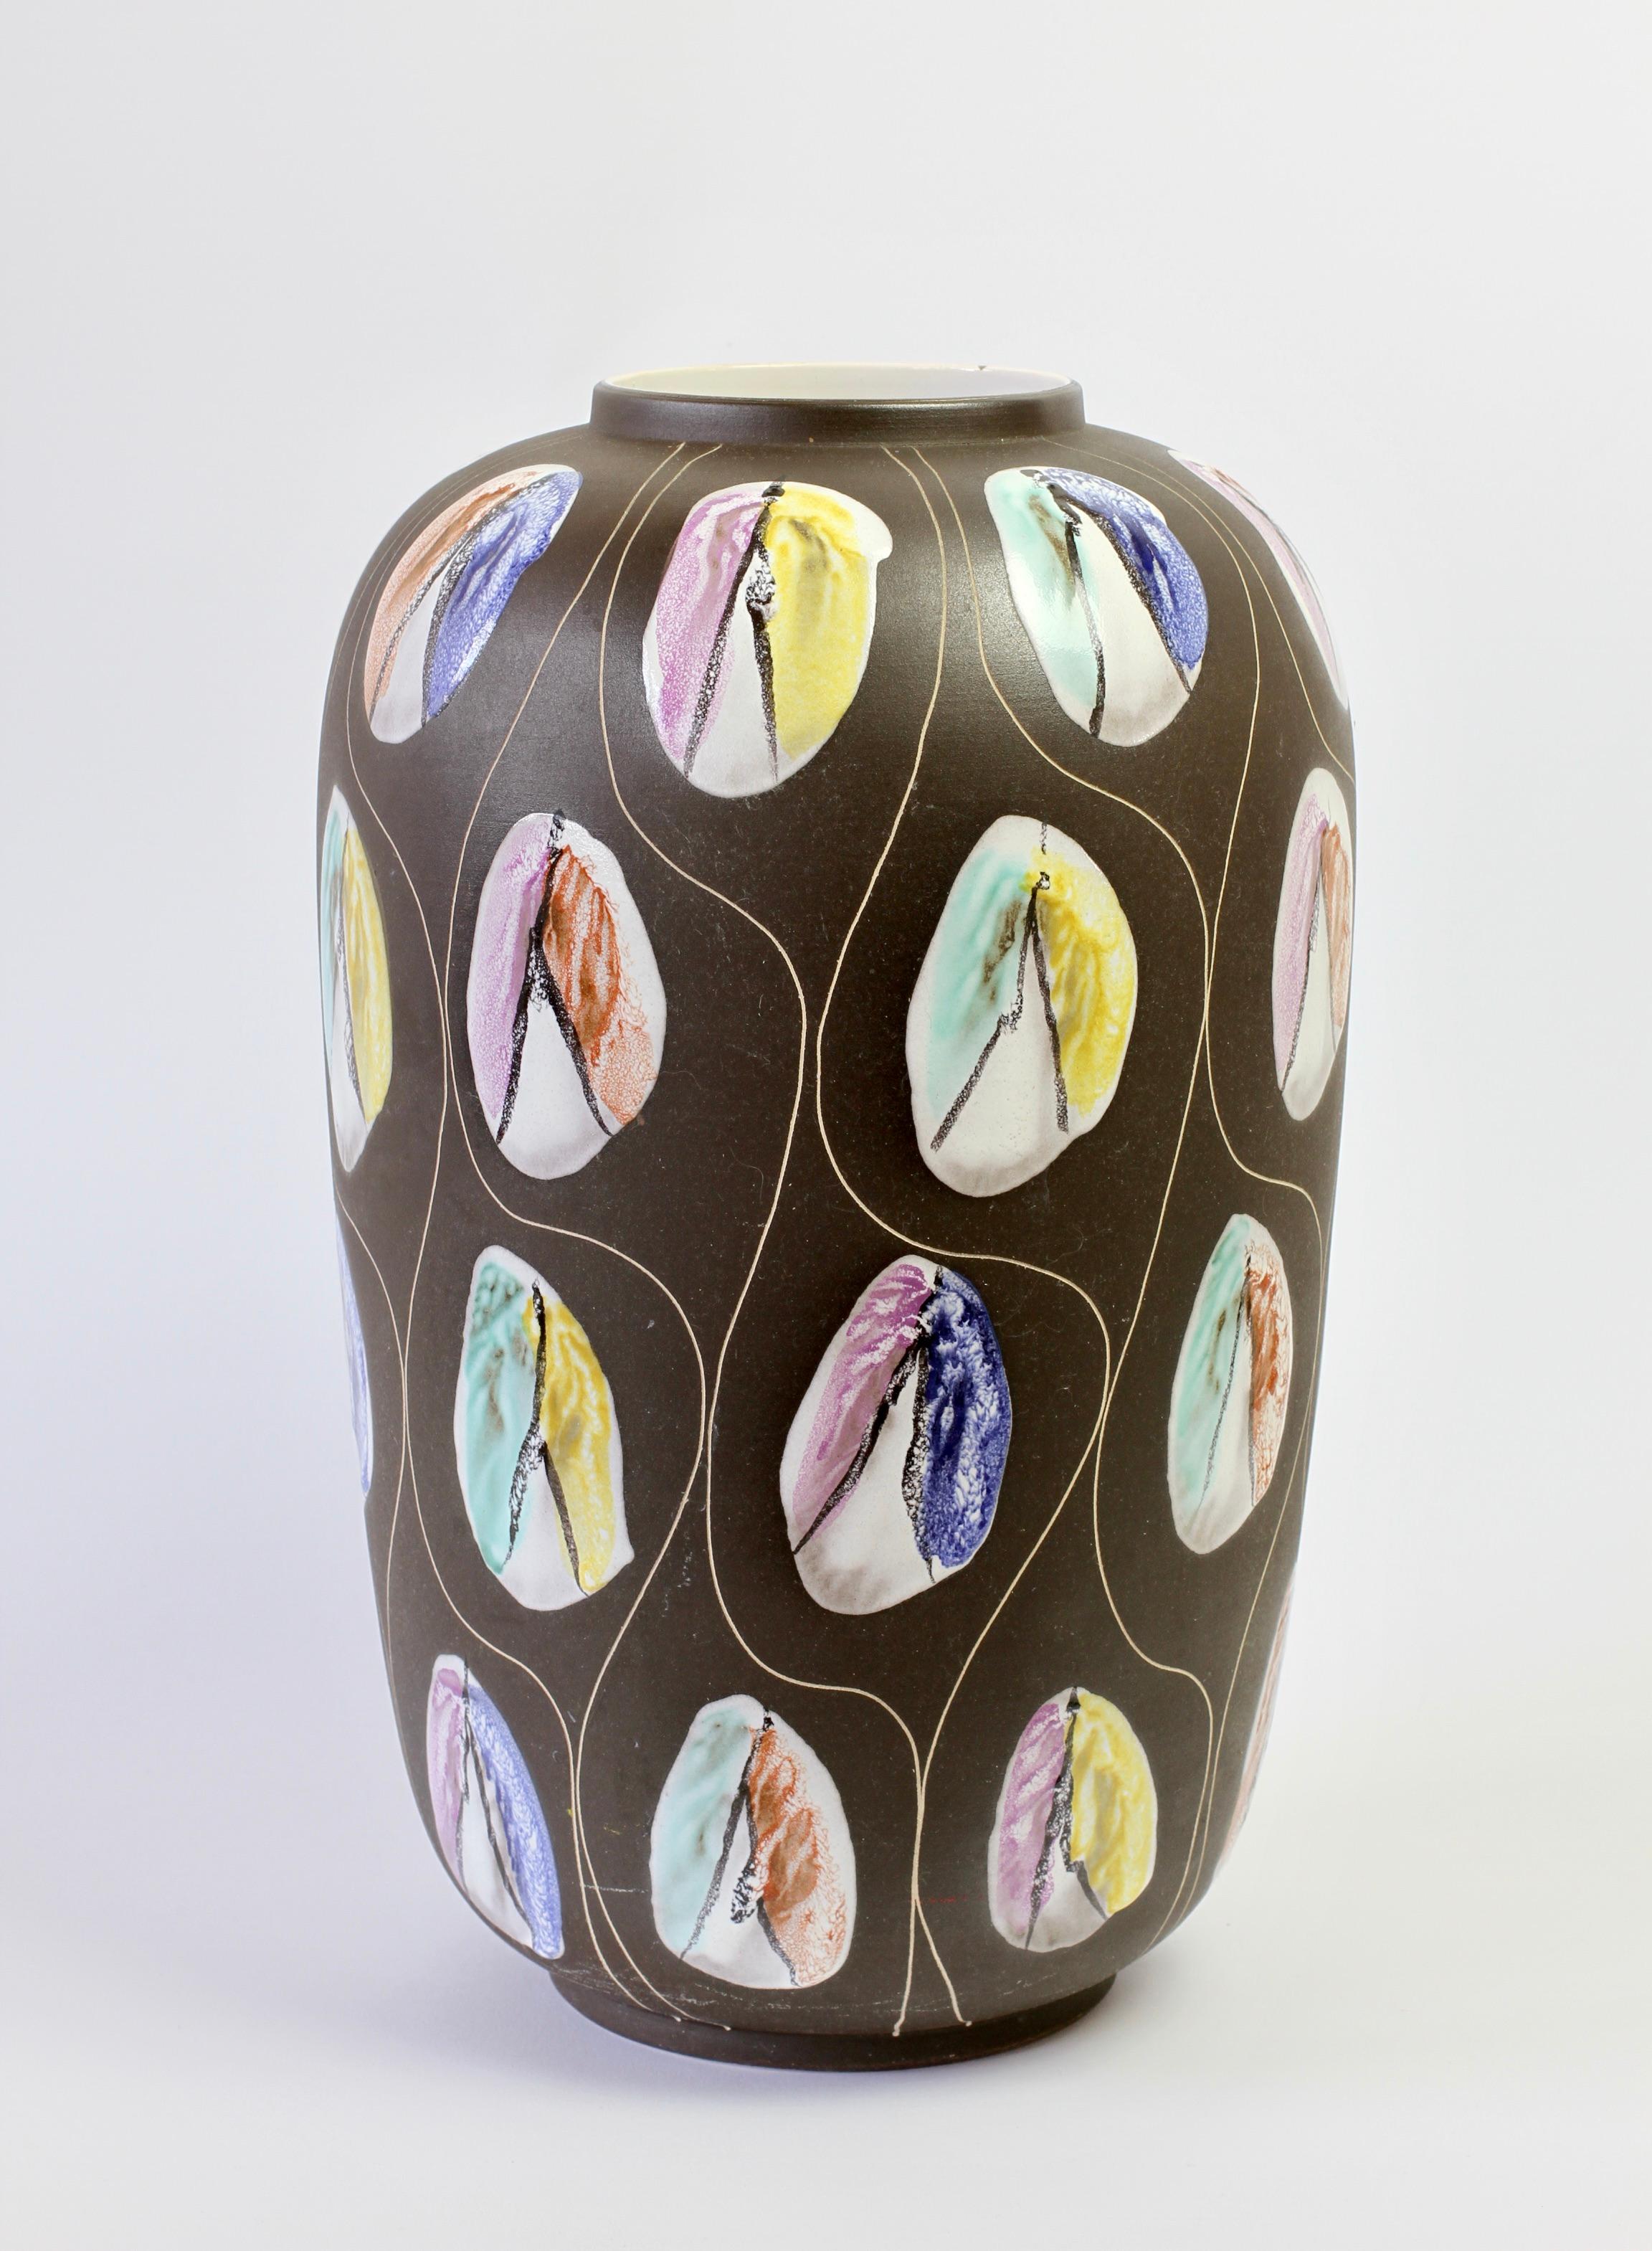 Fired Large West German Pottery Floor Vase by Bodo Mans for Bay Keramik, circa 1959